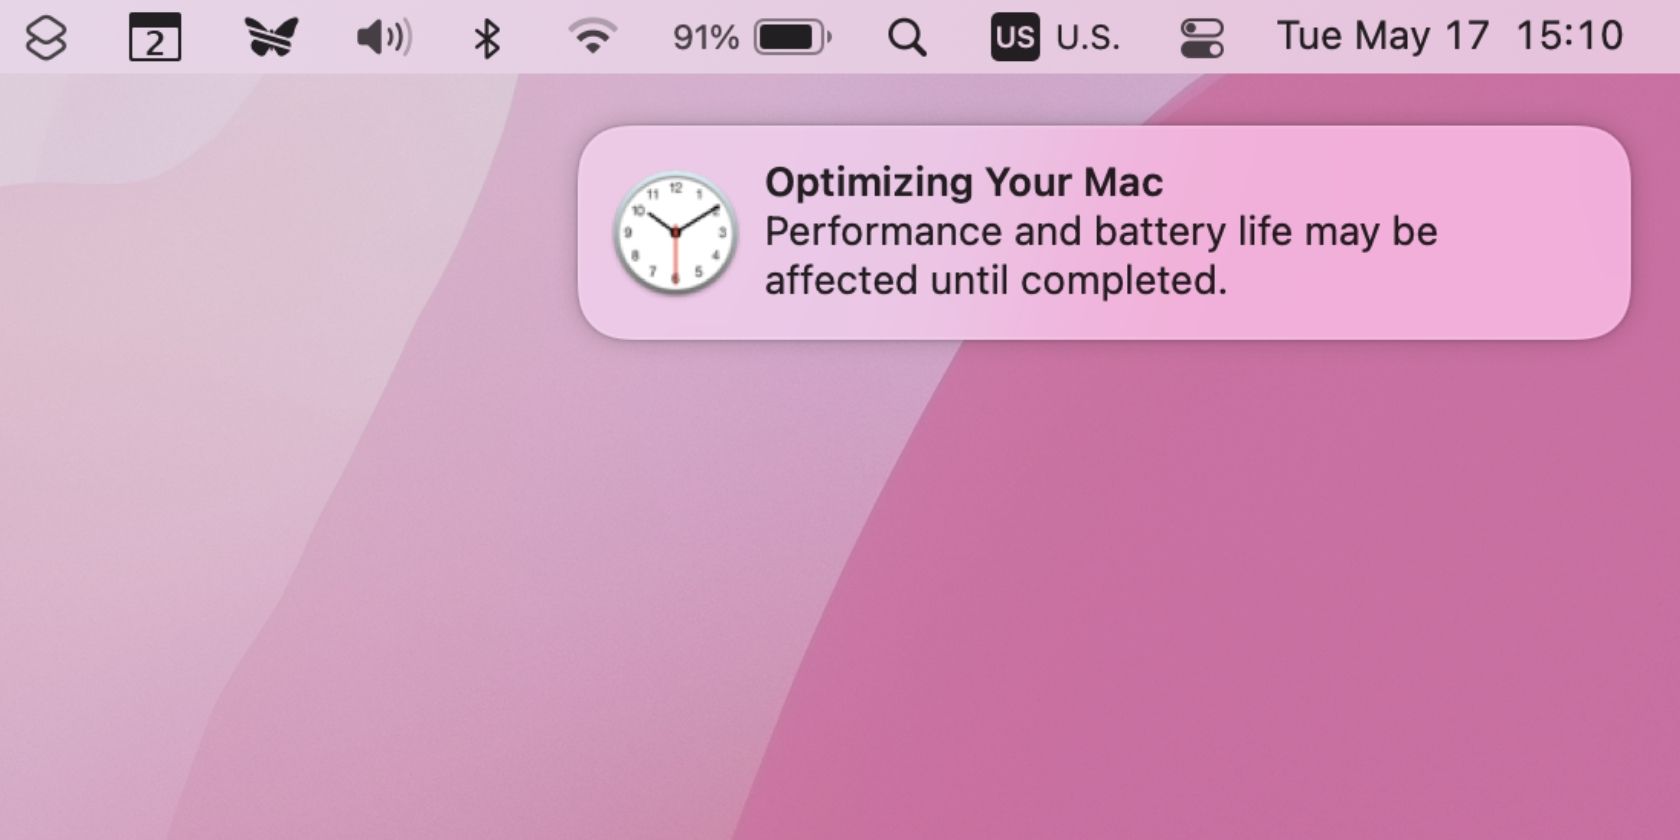 Notification informing the user that battery life and performance may be temporarily affected while macOS is optimizing the system